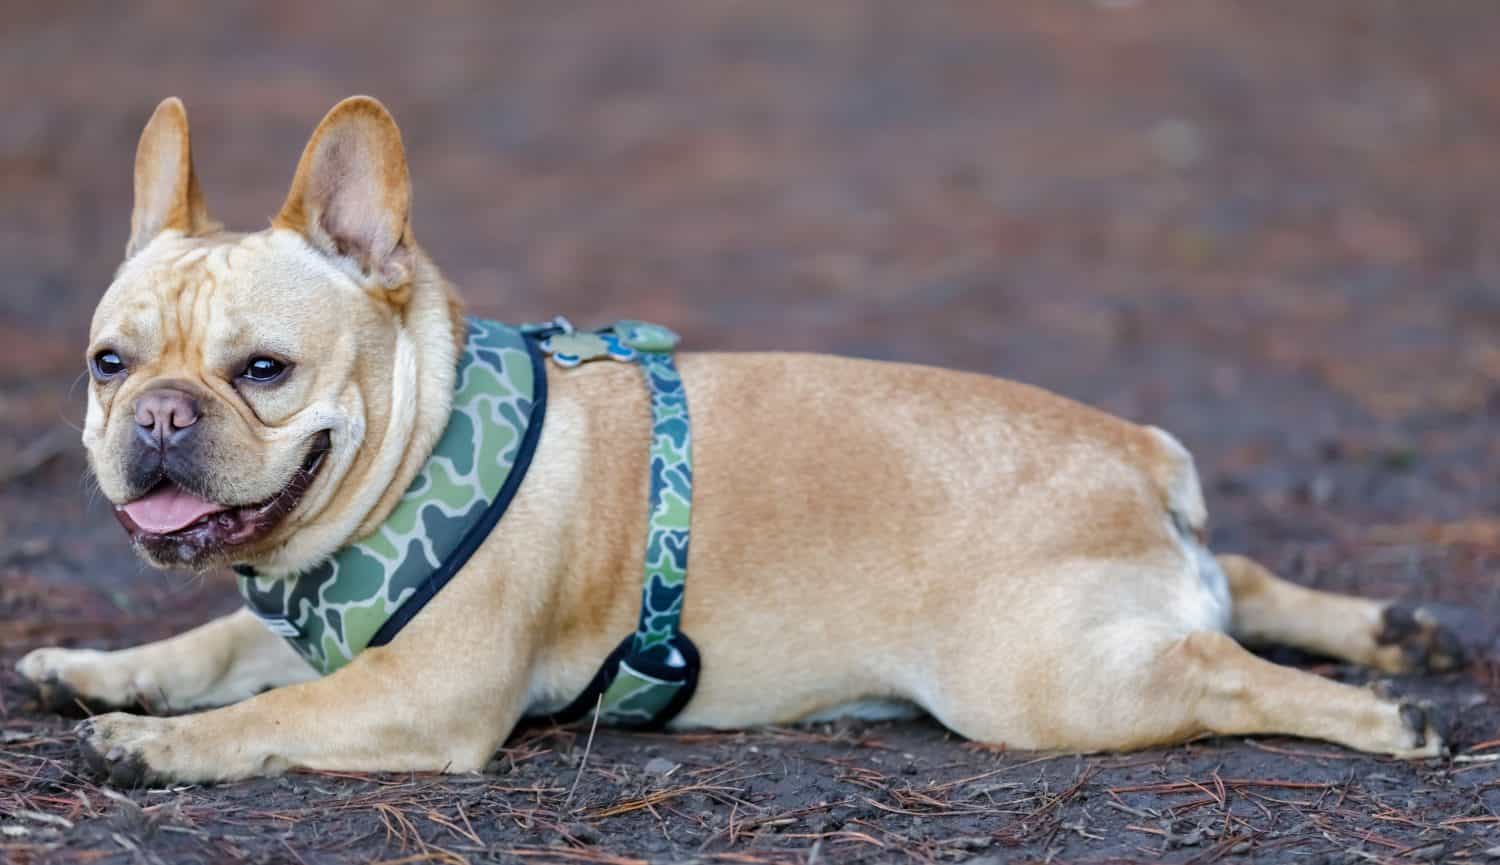 Young Male Frenchie resting with sploot posture to cool down. Off-leash dog park in Northern California.